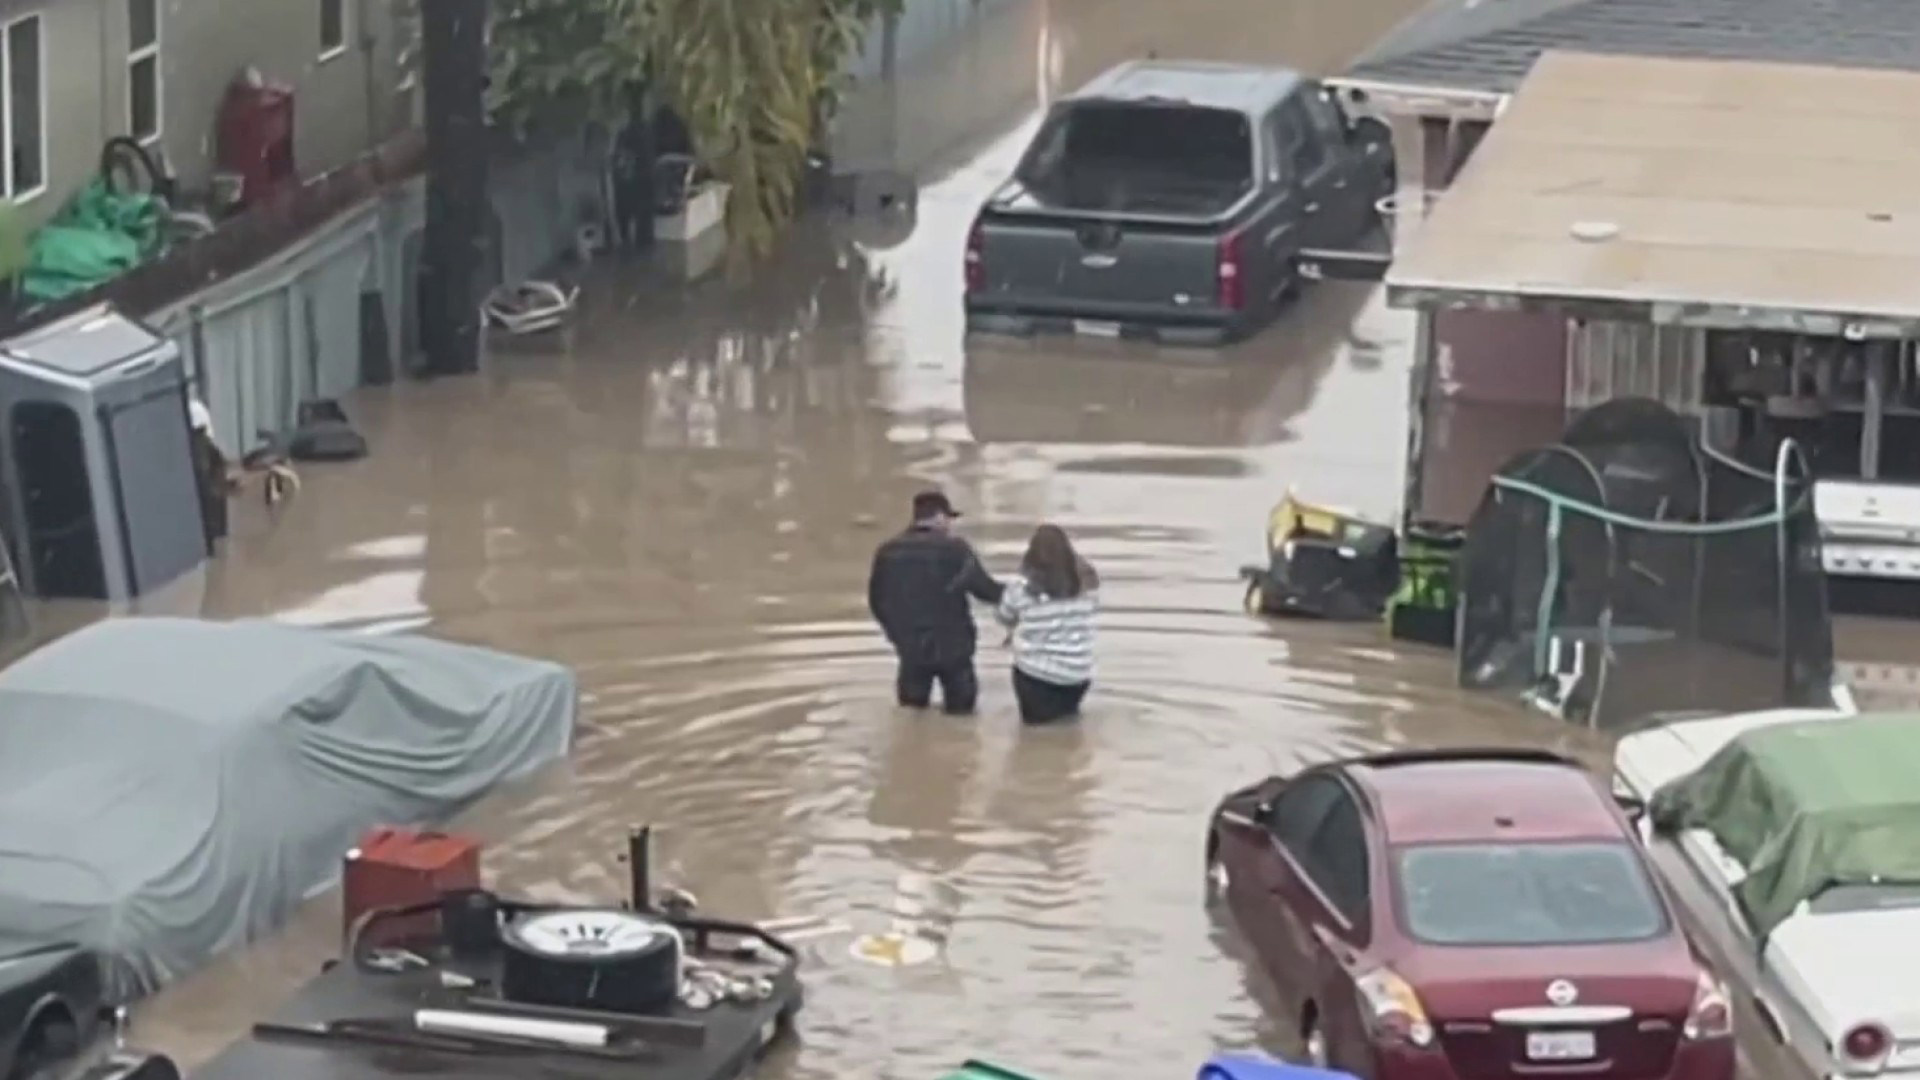 IRS extends tax deadline for San Diego County after flooding. Here's